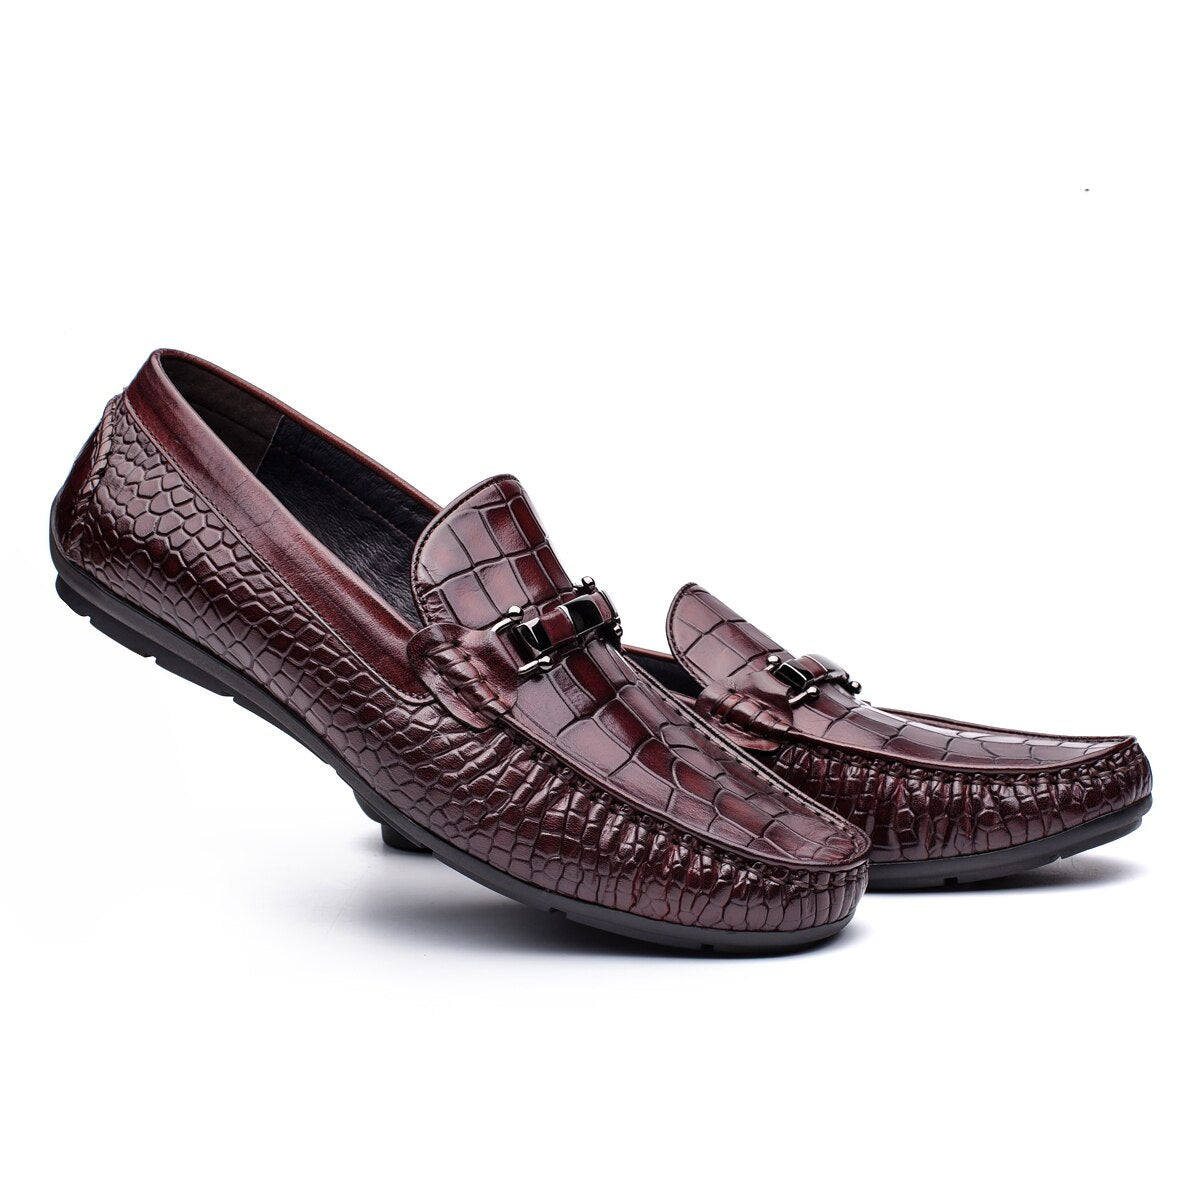 Loafer Shoes Real Leather Slip On Daily Formal Fashion Luxury Shoes